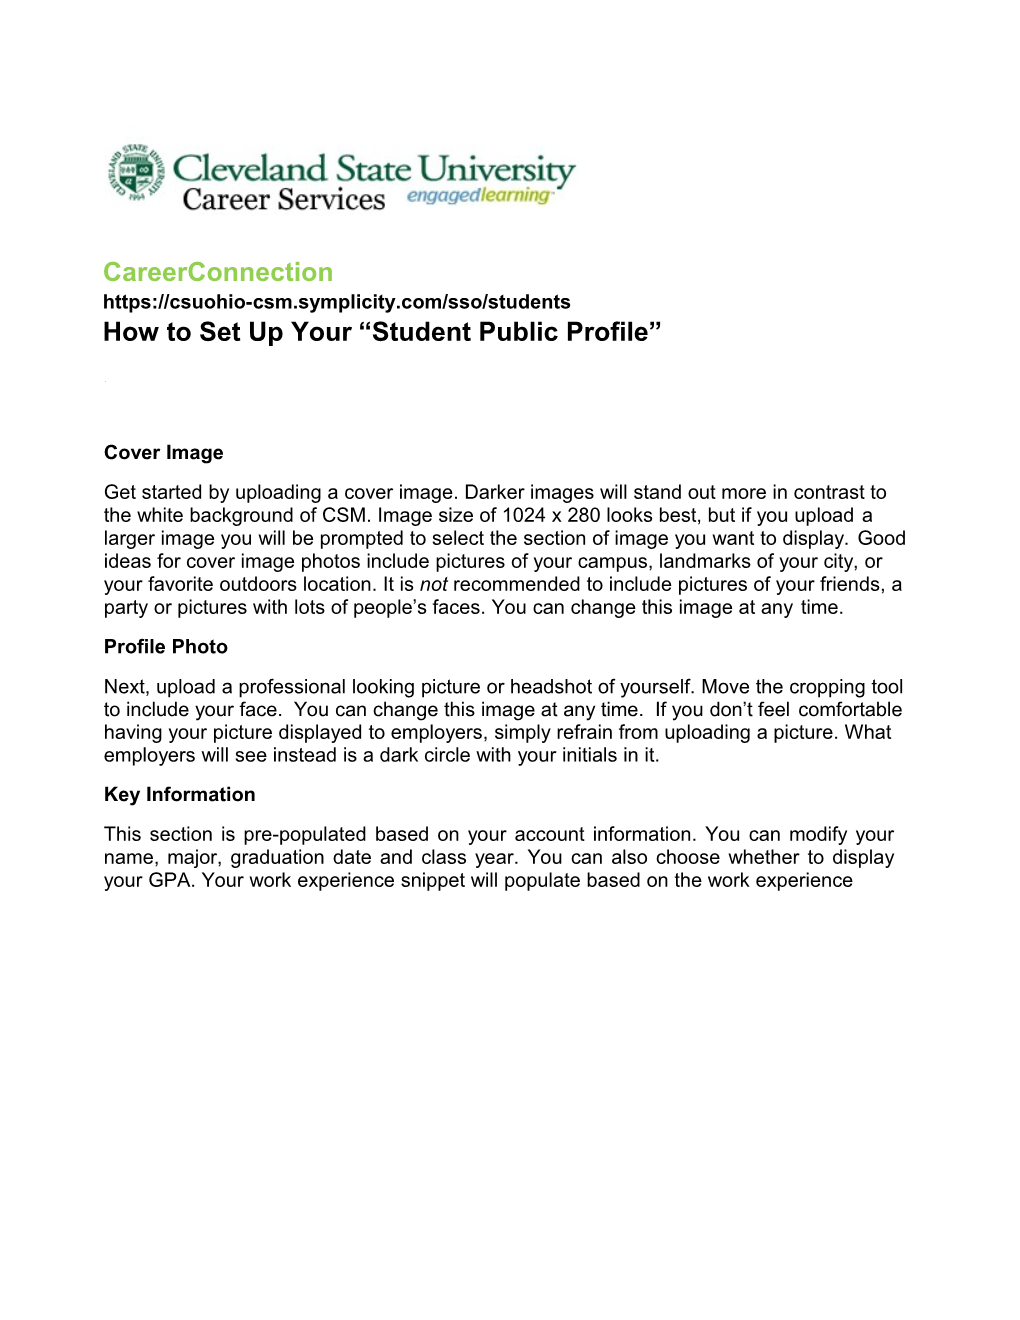 CSM-Public Profile - How to for Students